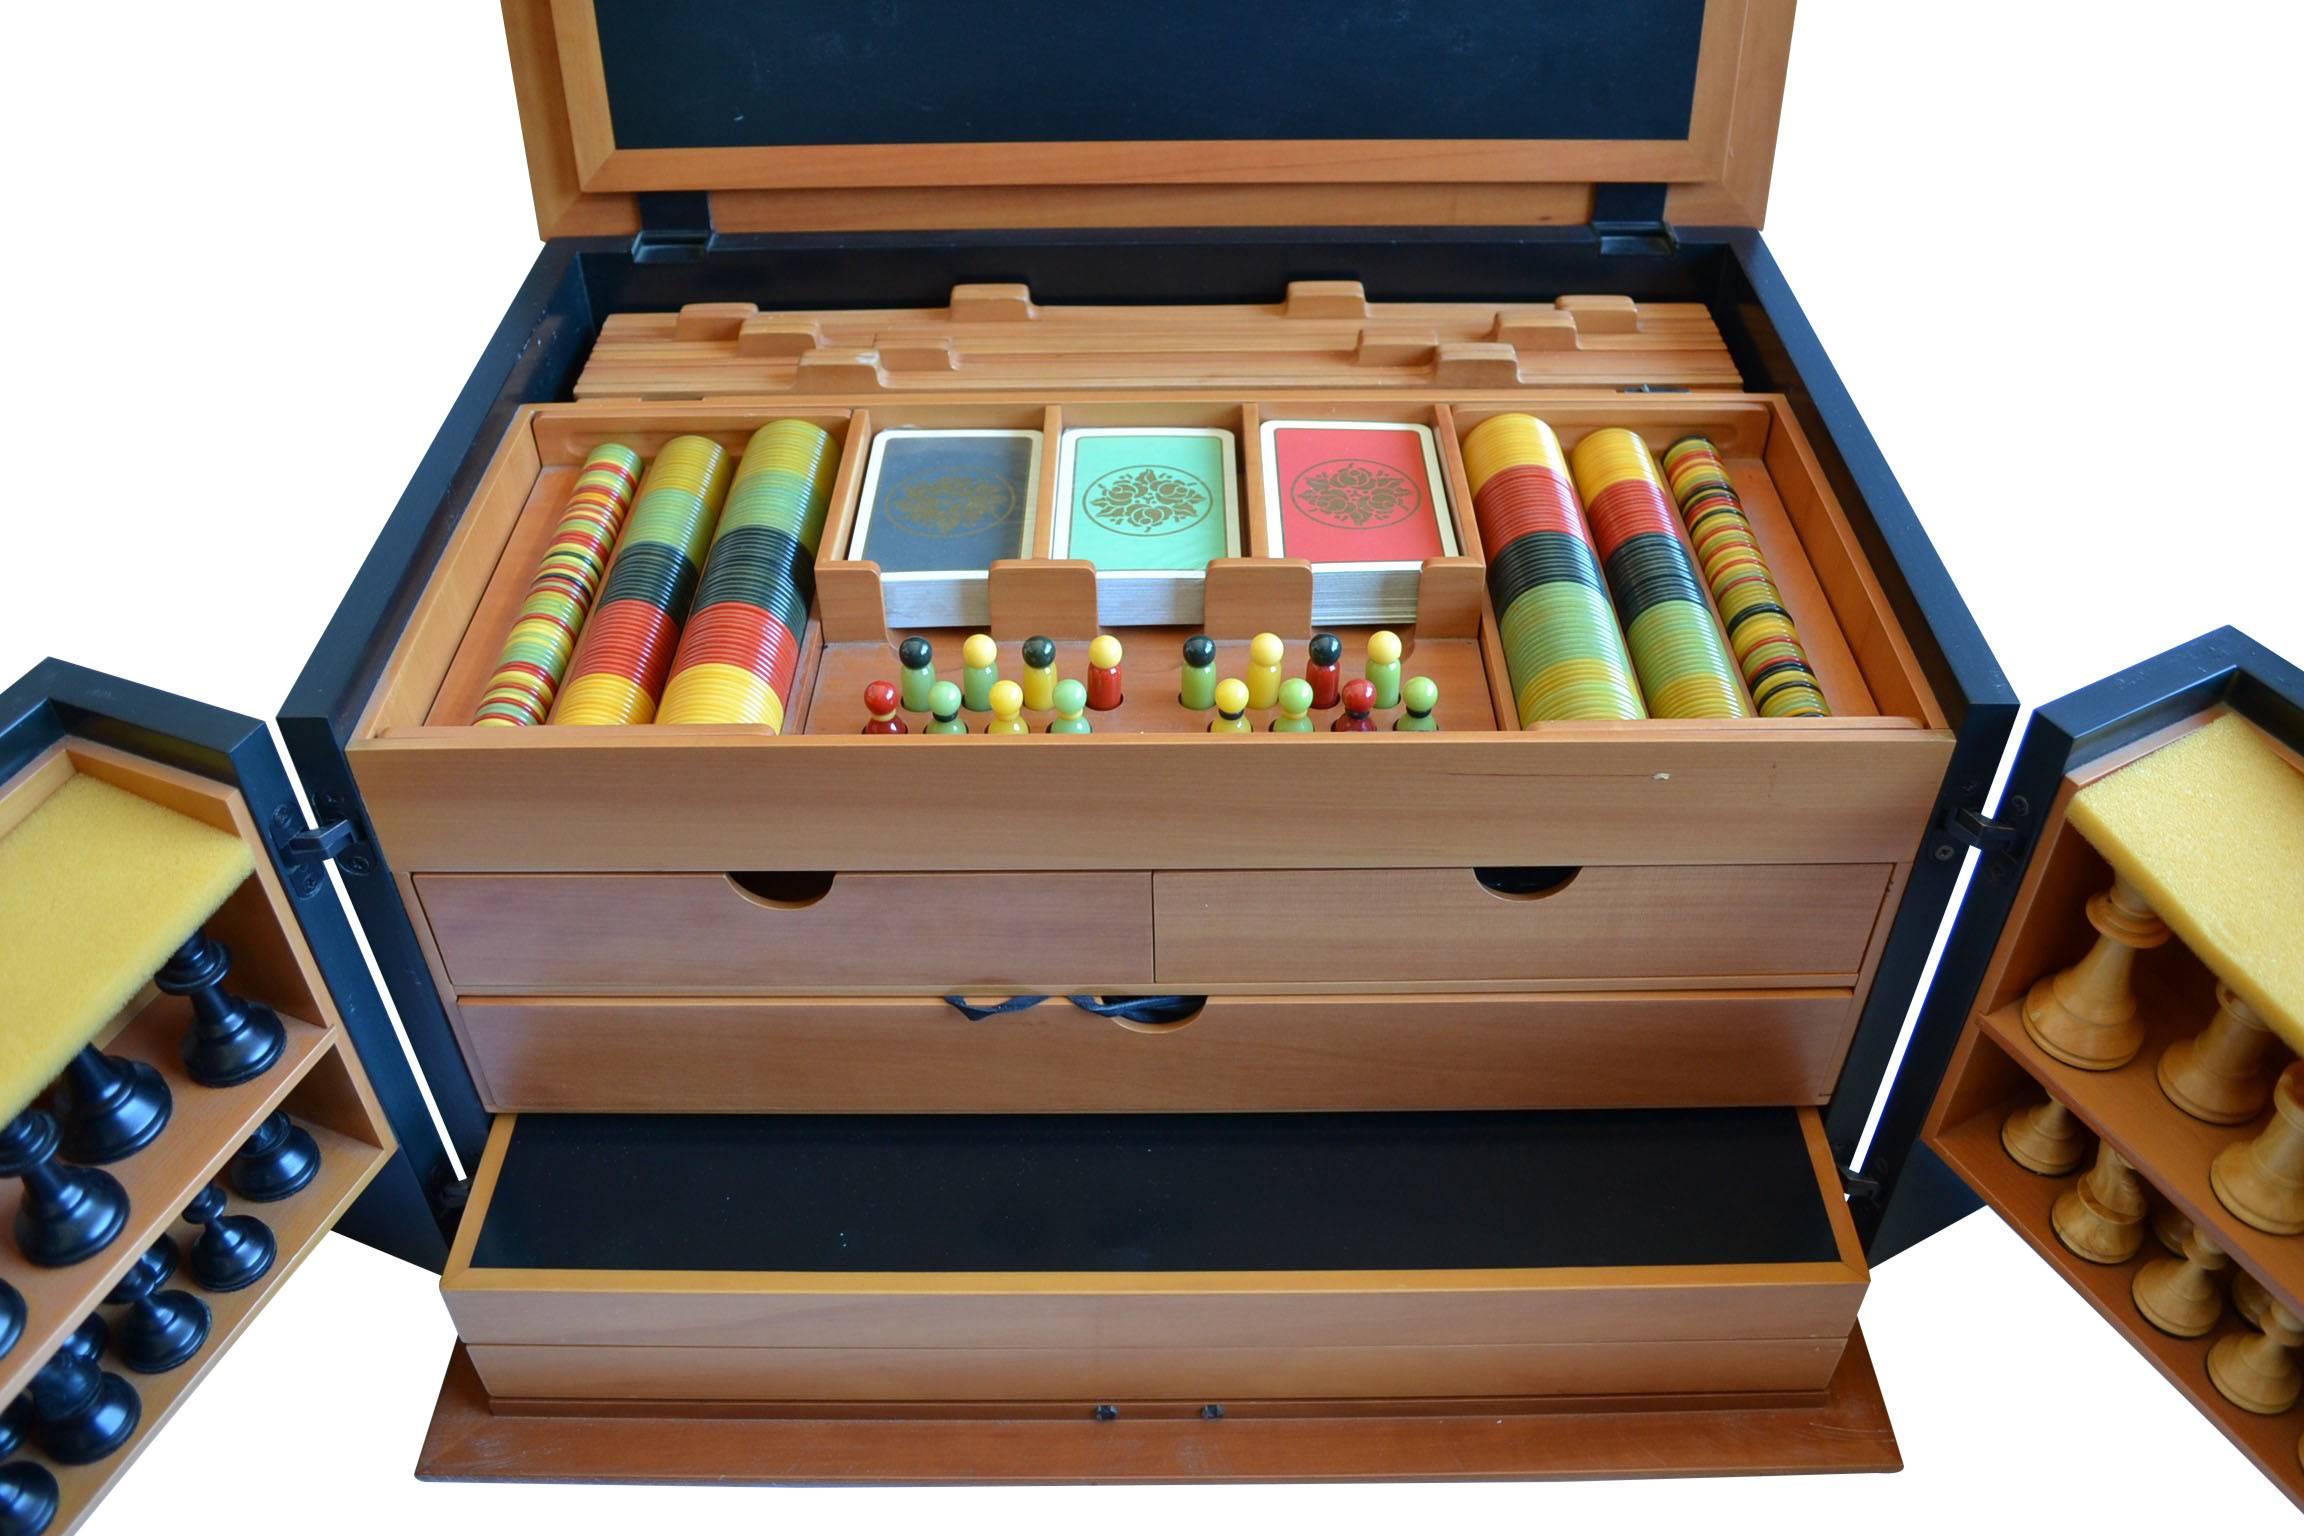 Pierluigi Ghianda for Pomellato – The games box
The games box was made by ebony specialist Pierluigi Ghianda for Pomellato in 1982. A one-of-a-kind, exceptional piece of furniture. Only 300 numbered boxes were produced. Made from precious